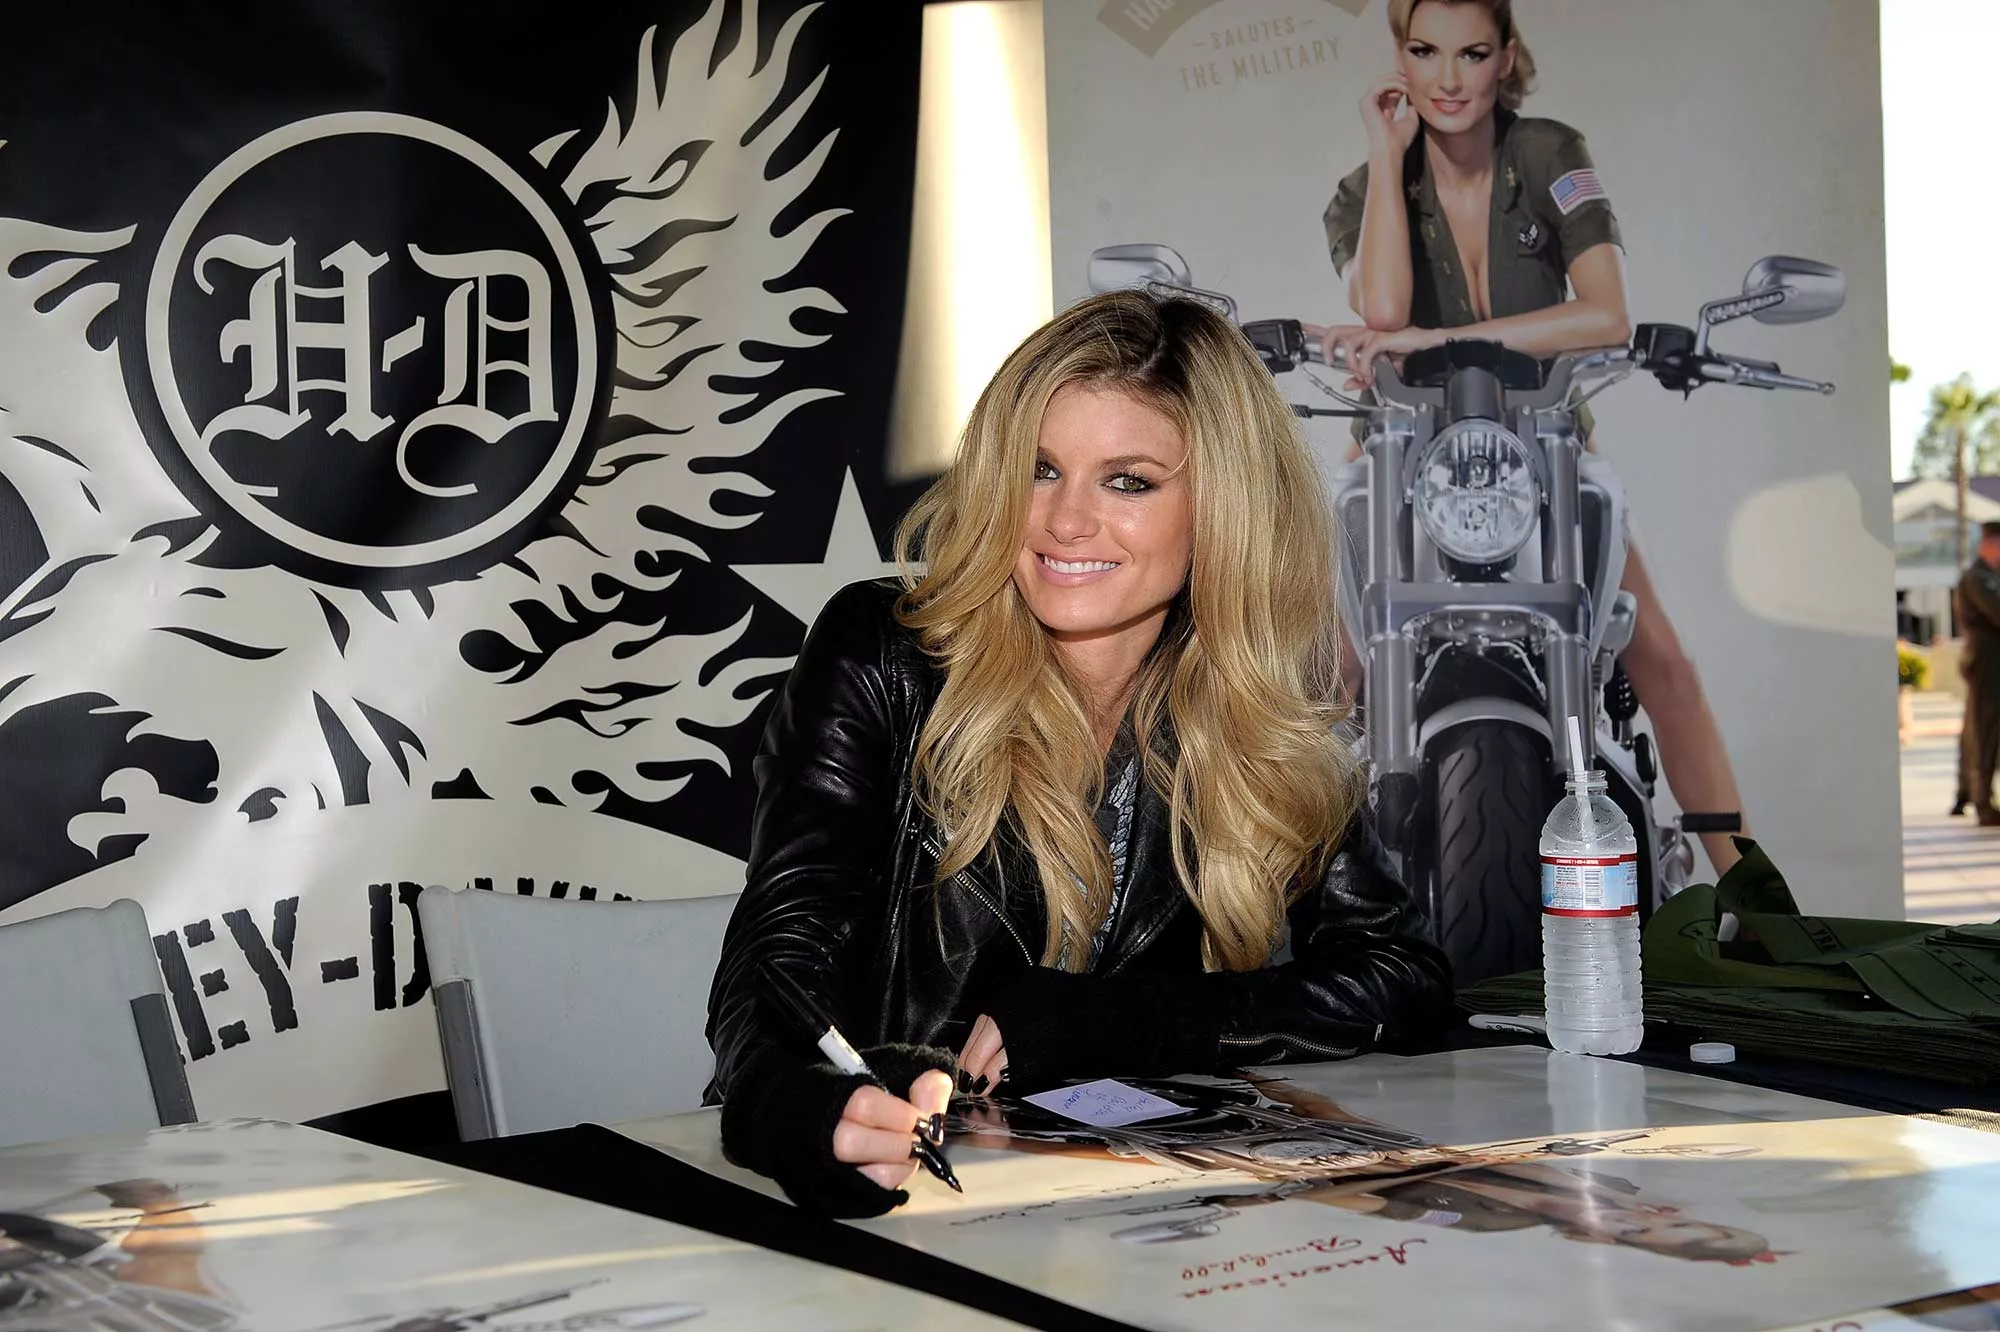 Model and motorcycle rider Marisa Miller signed autographs for Marines at a Harley event.